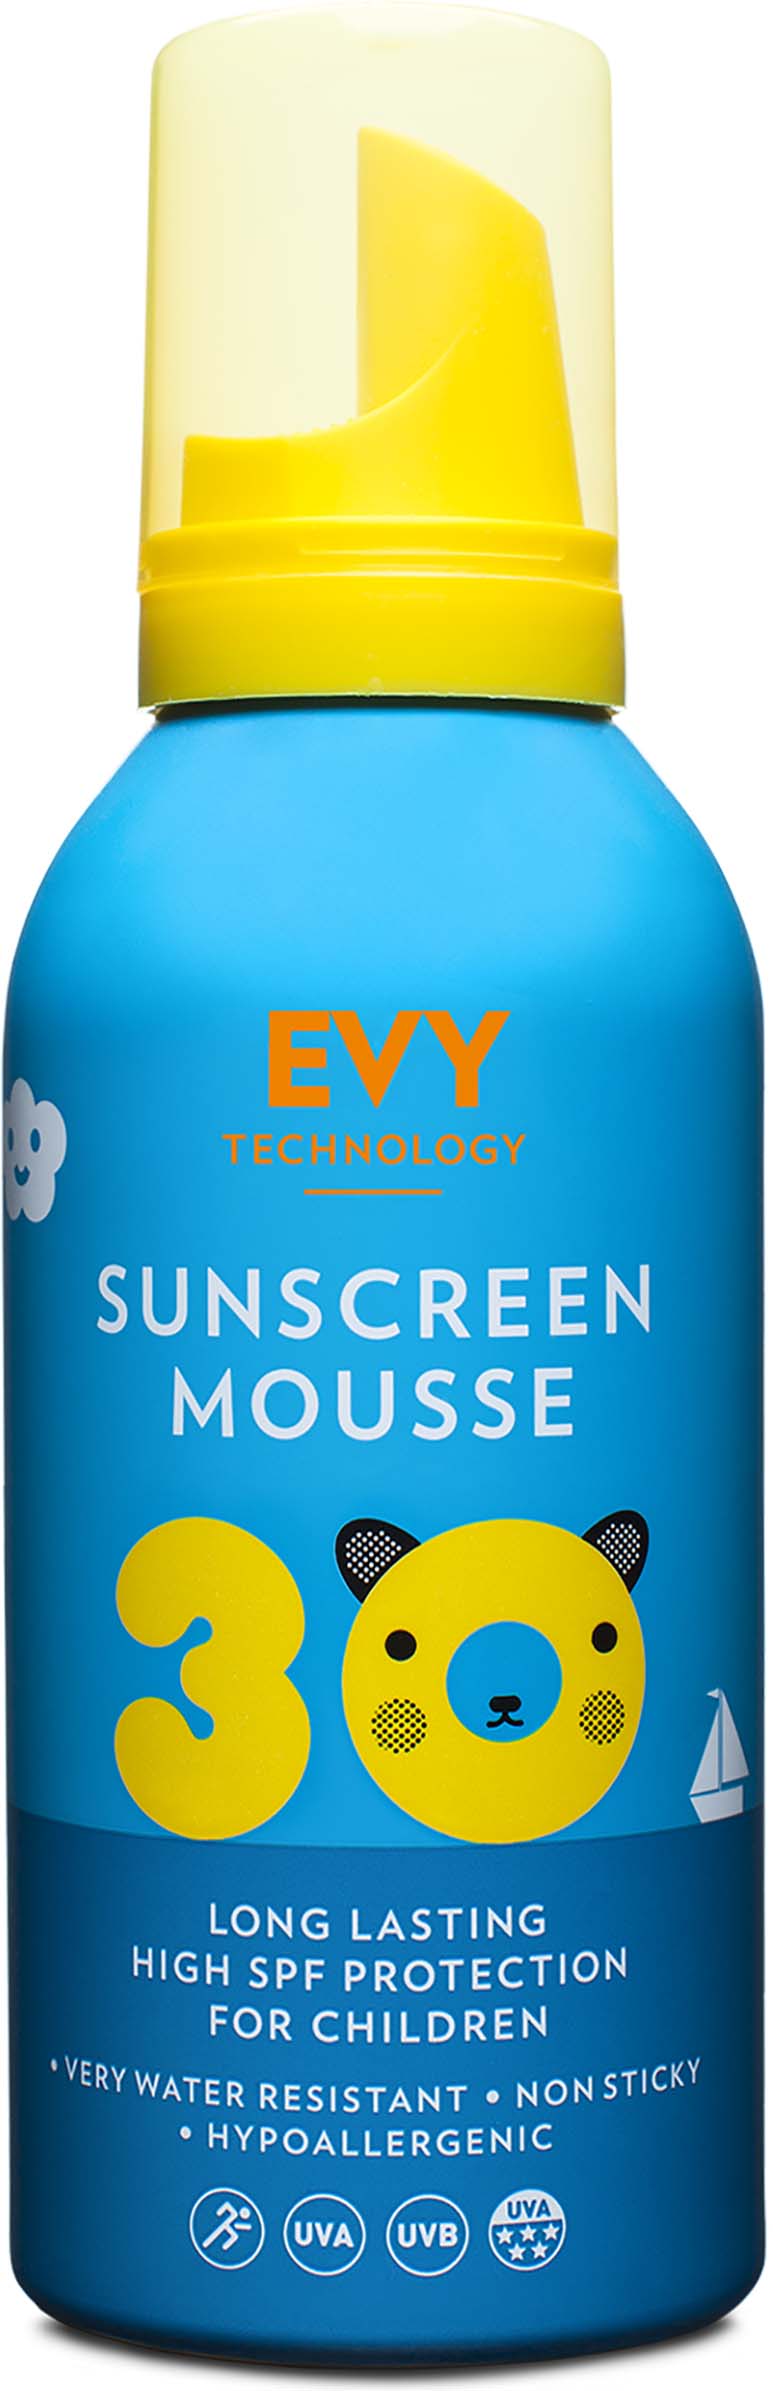 EVY Sunscreen Mousse SPF30 Kids